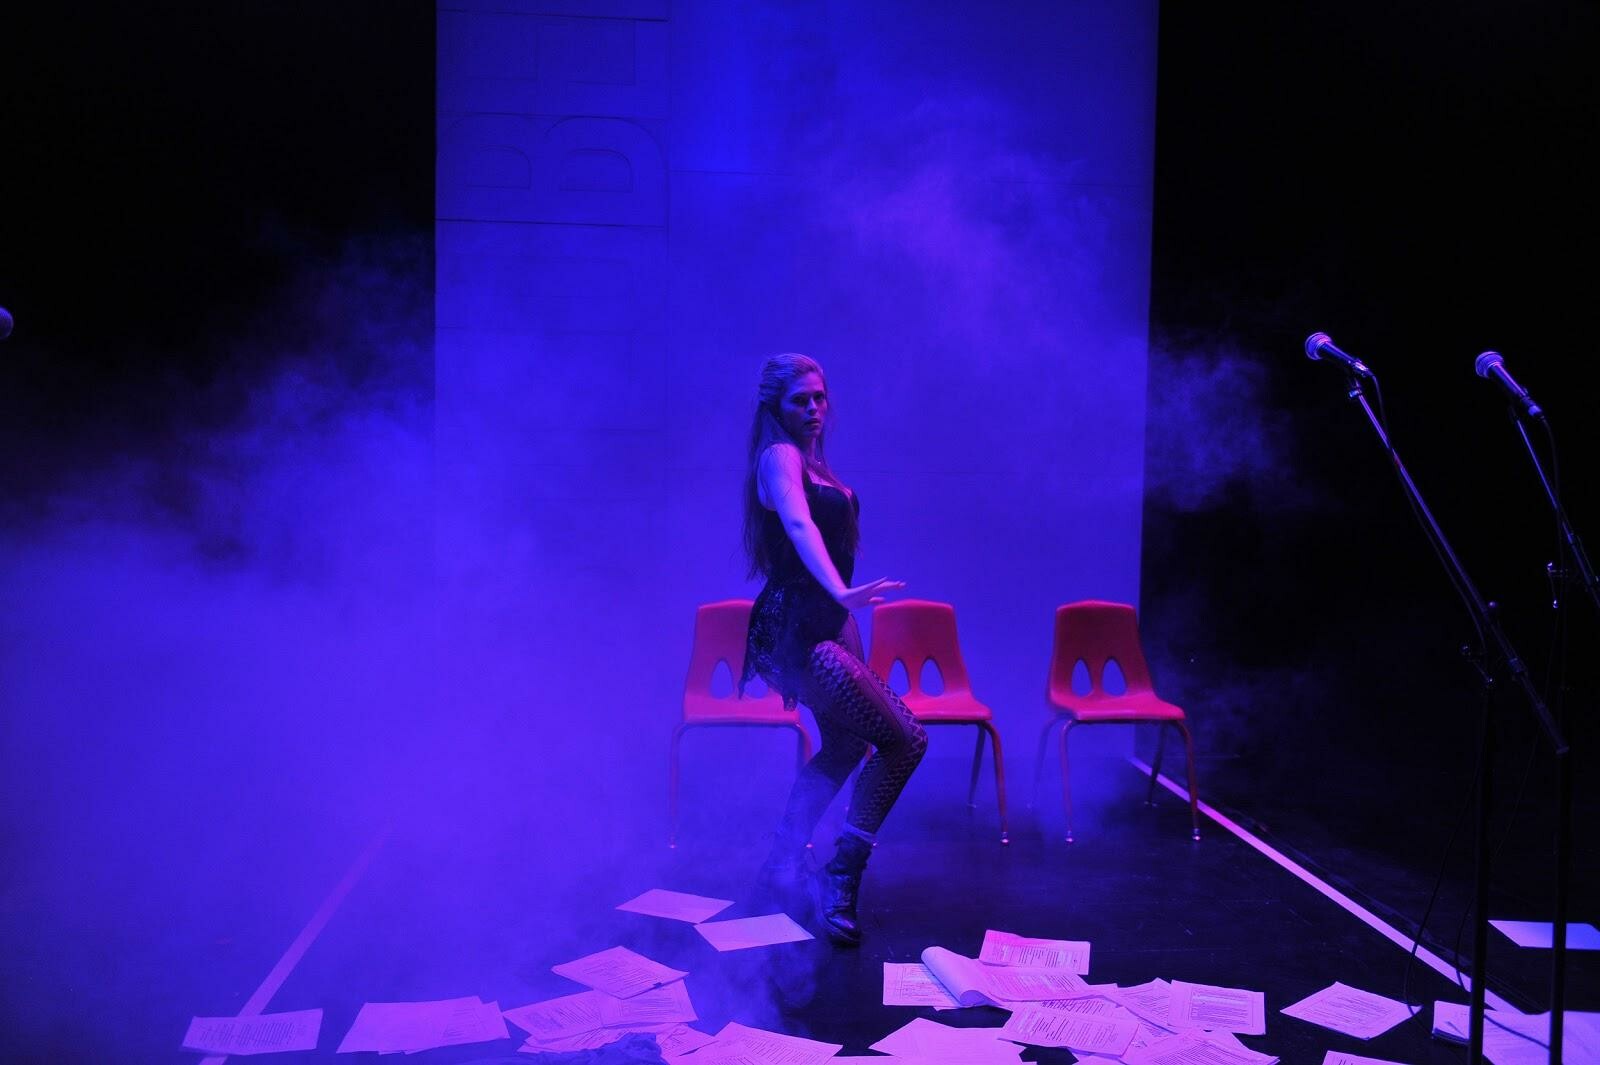 performer in foggy blue light dancing in front of chairs